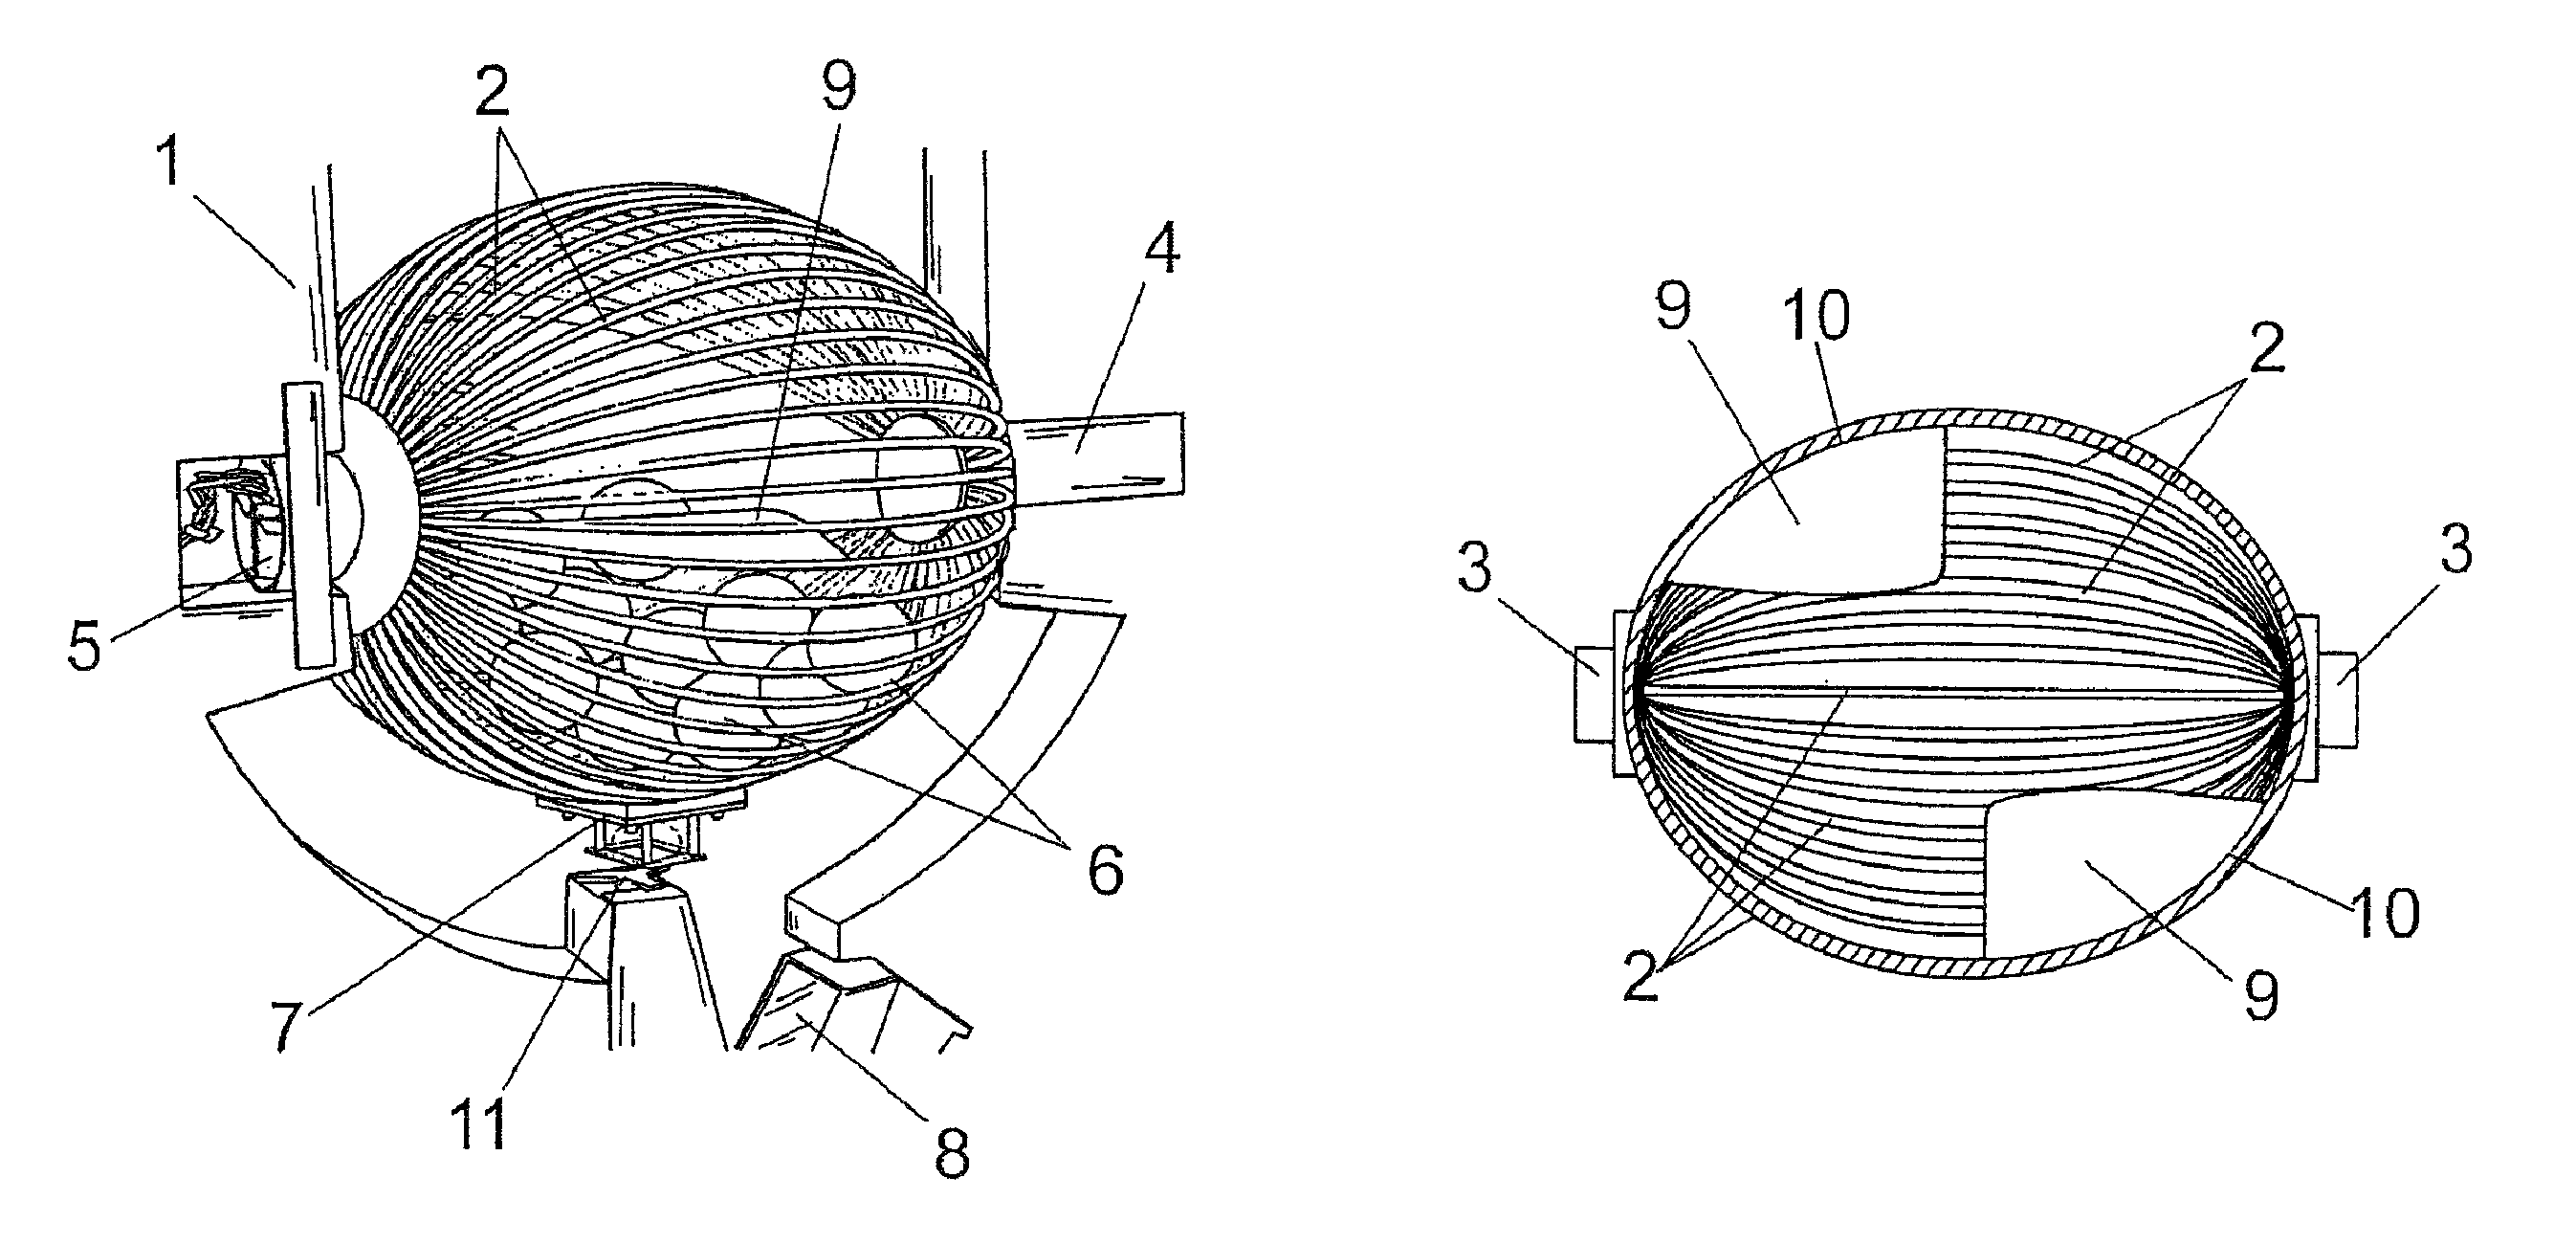 Ball whirling device for recreational games of chance